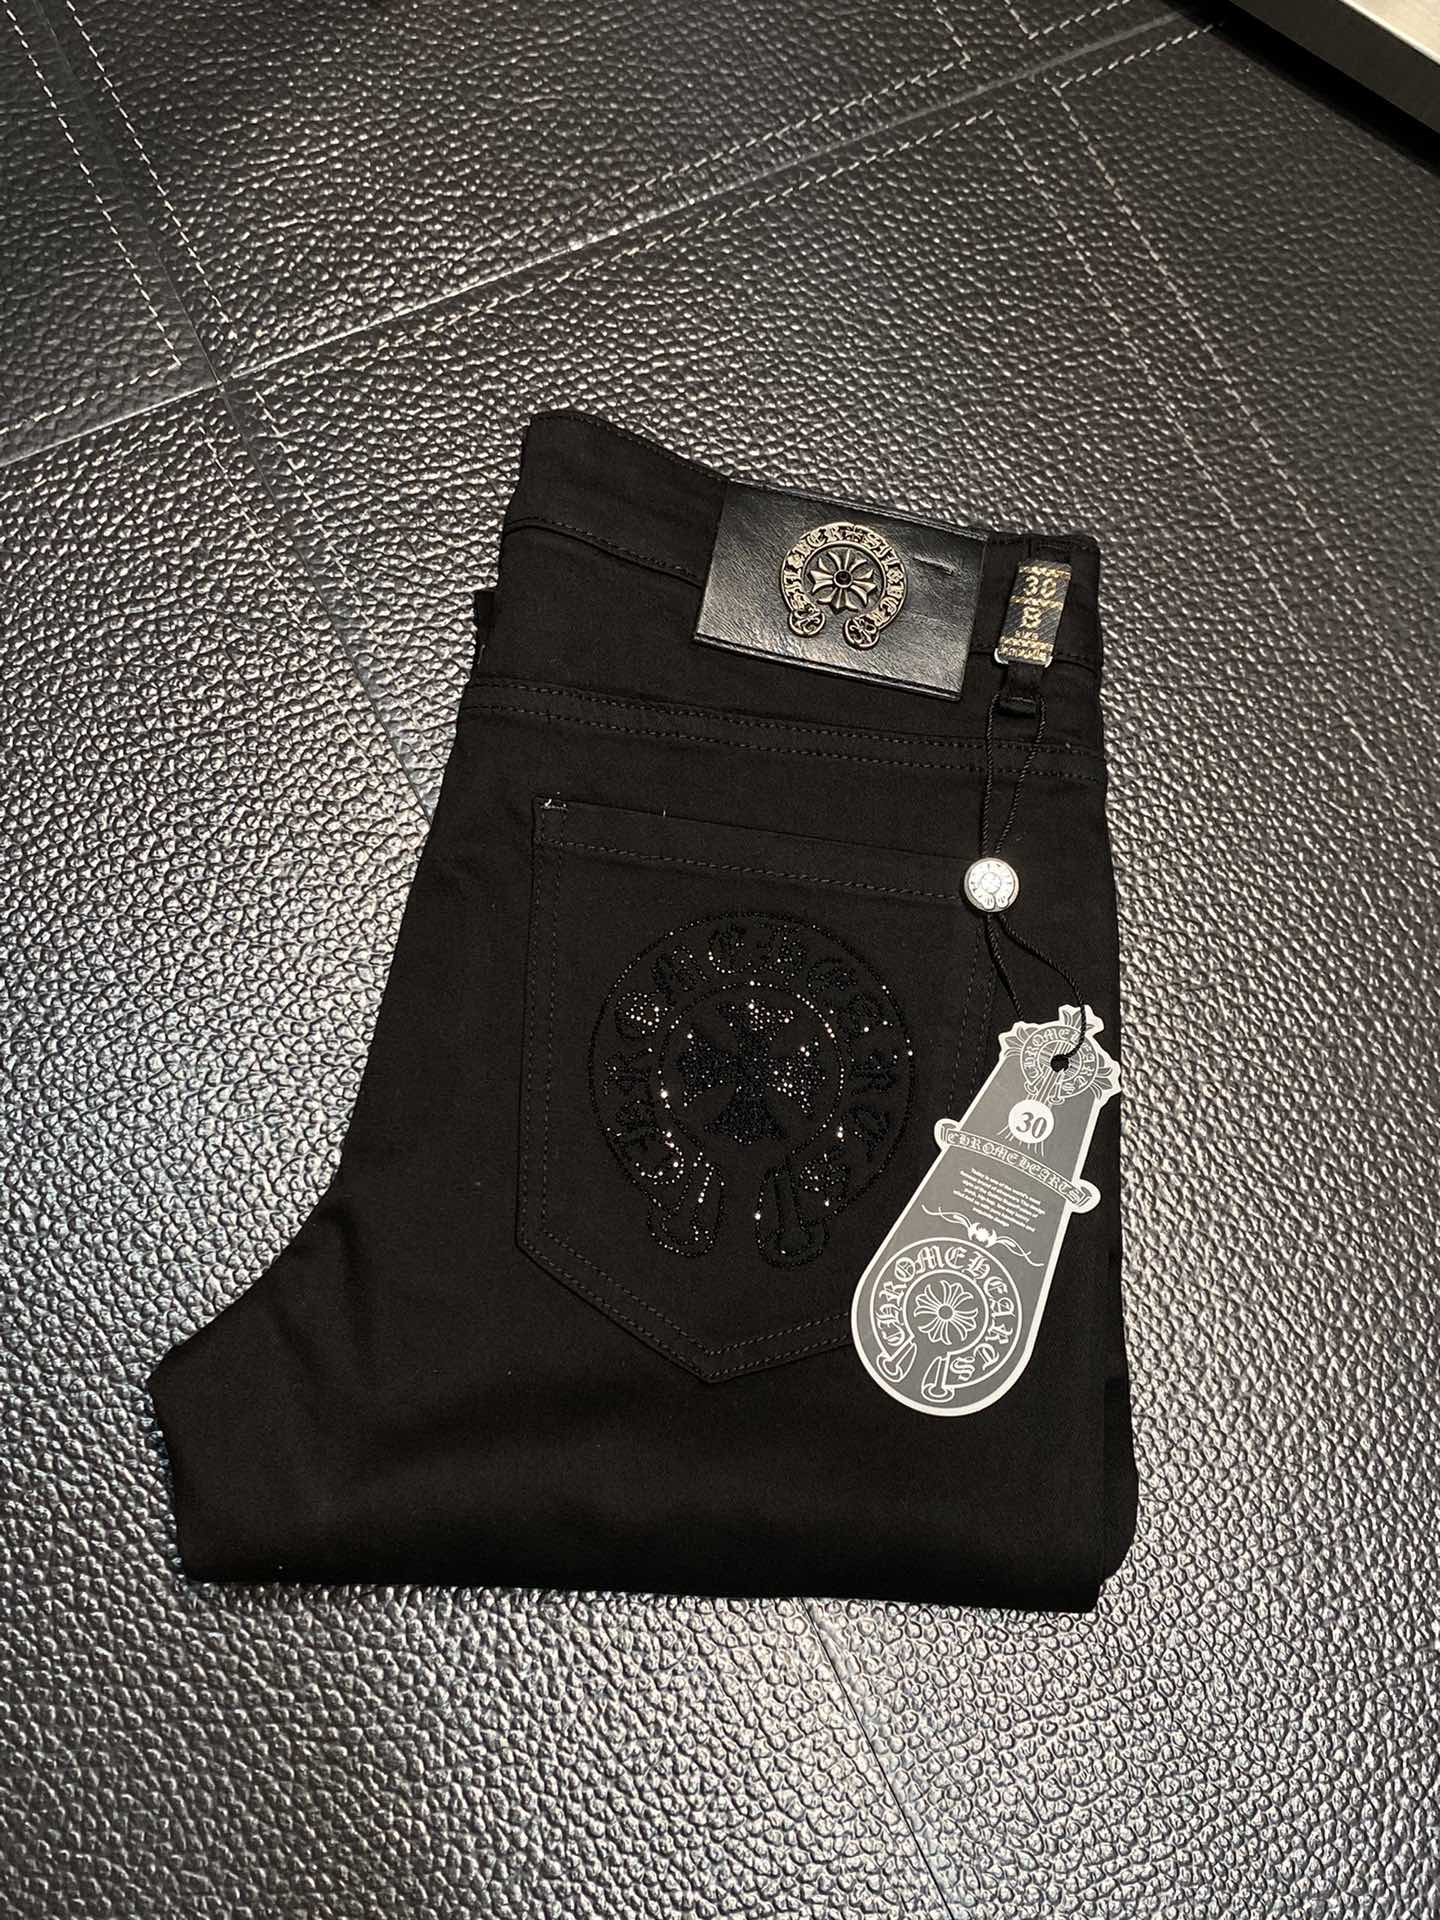 Chrome Hearts Top
 Clothing Jeans Casual